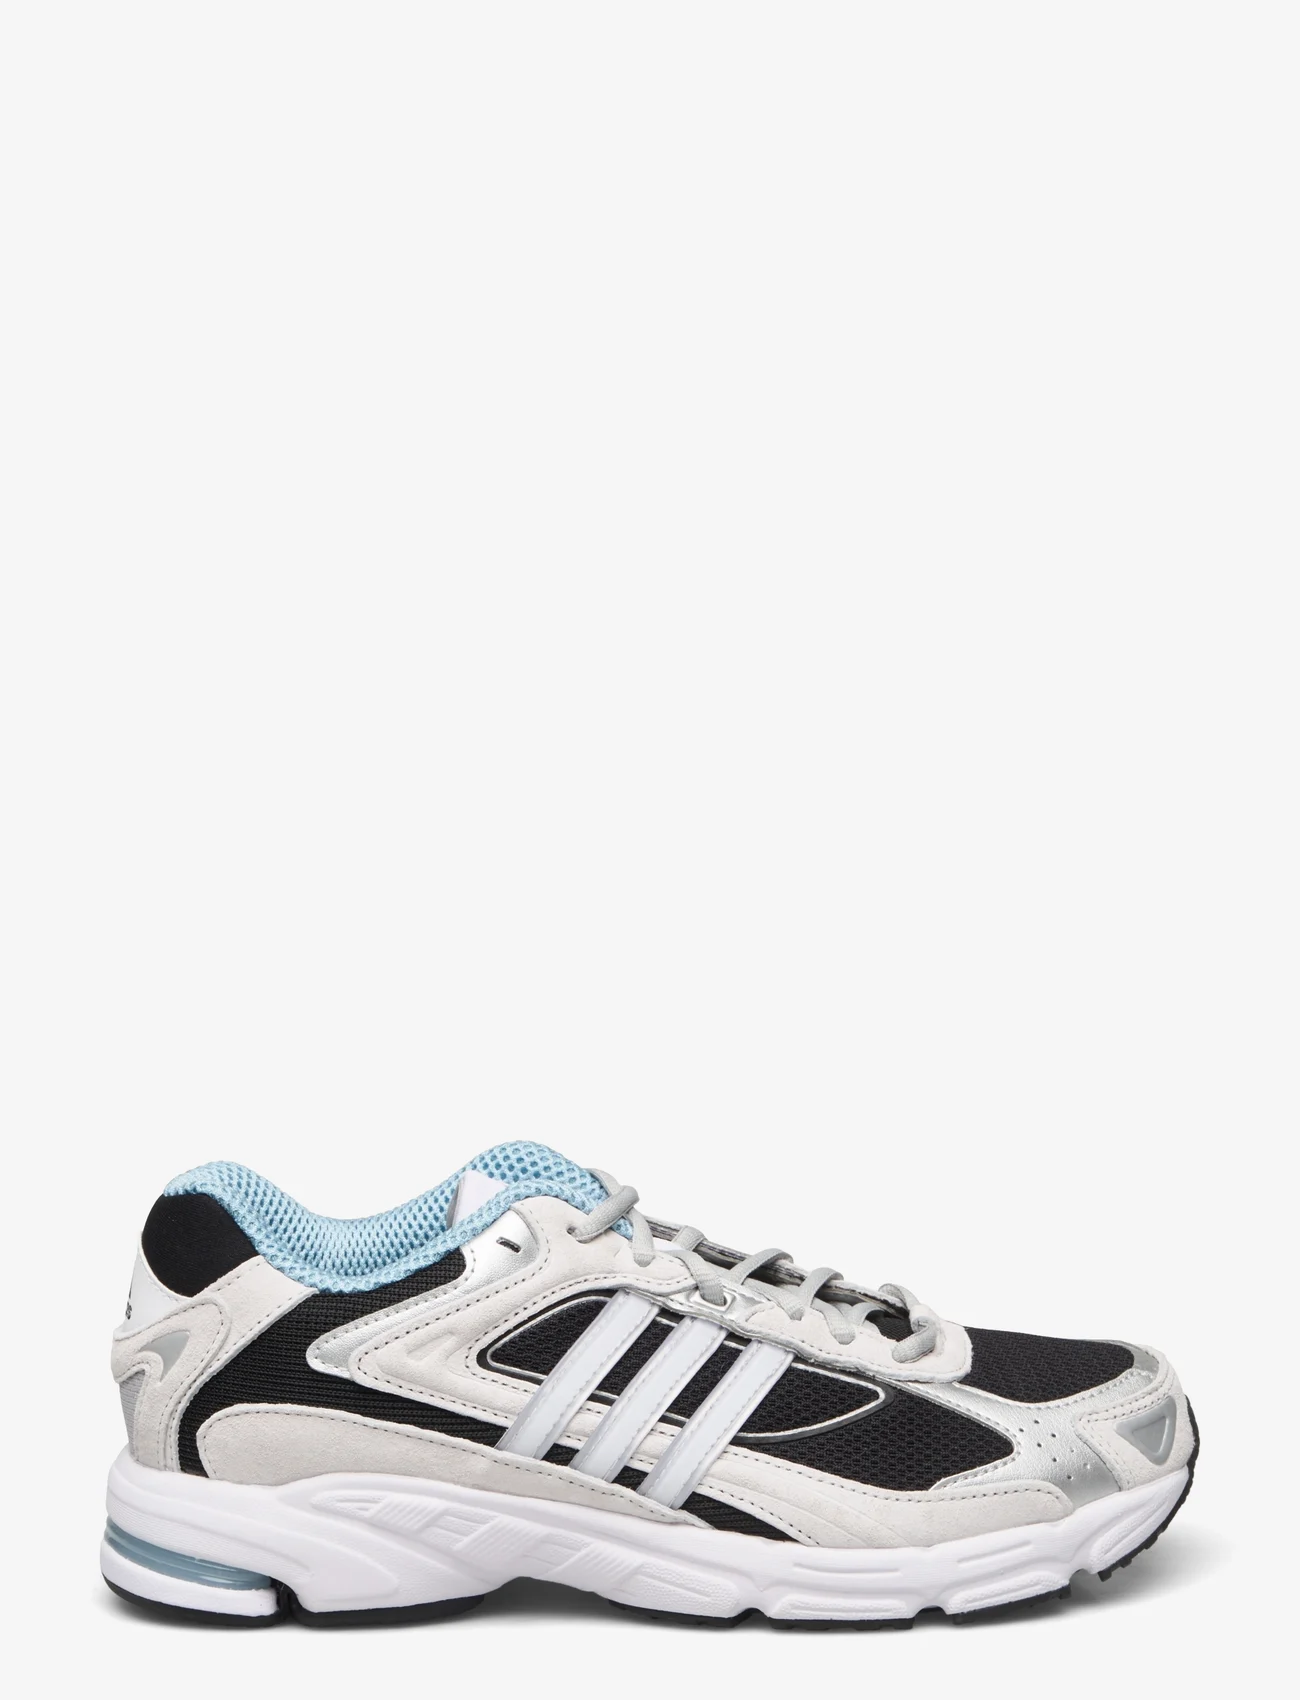 adidas Originals - Response CL Shoes - chunky sneakers - cblack/ftwwht/clblue - 1